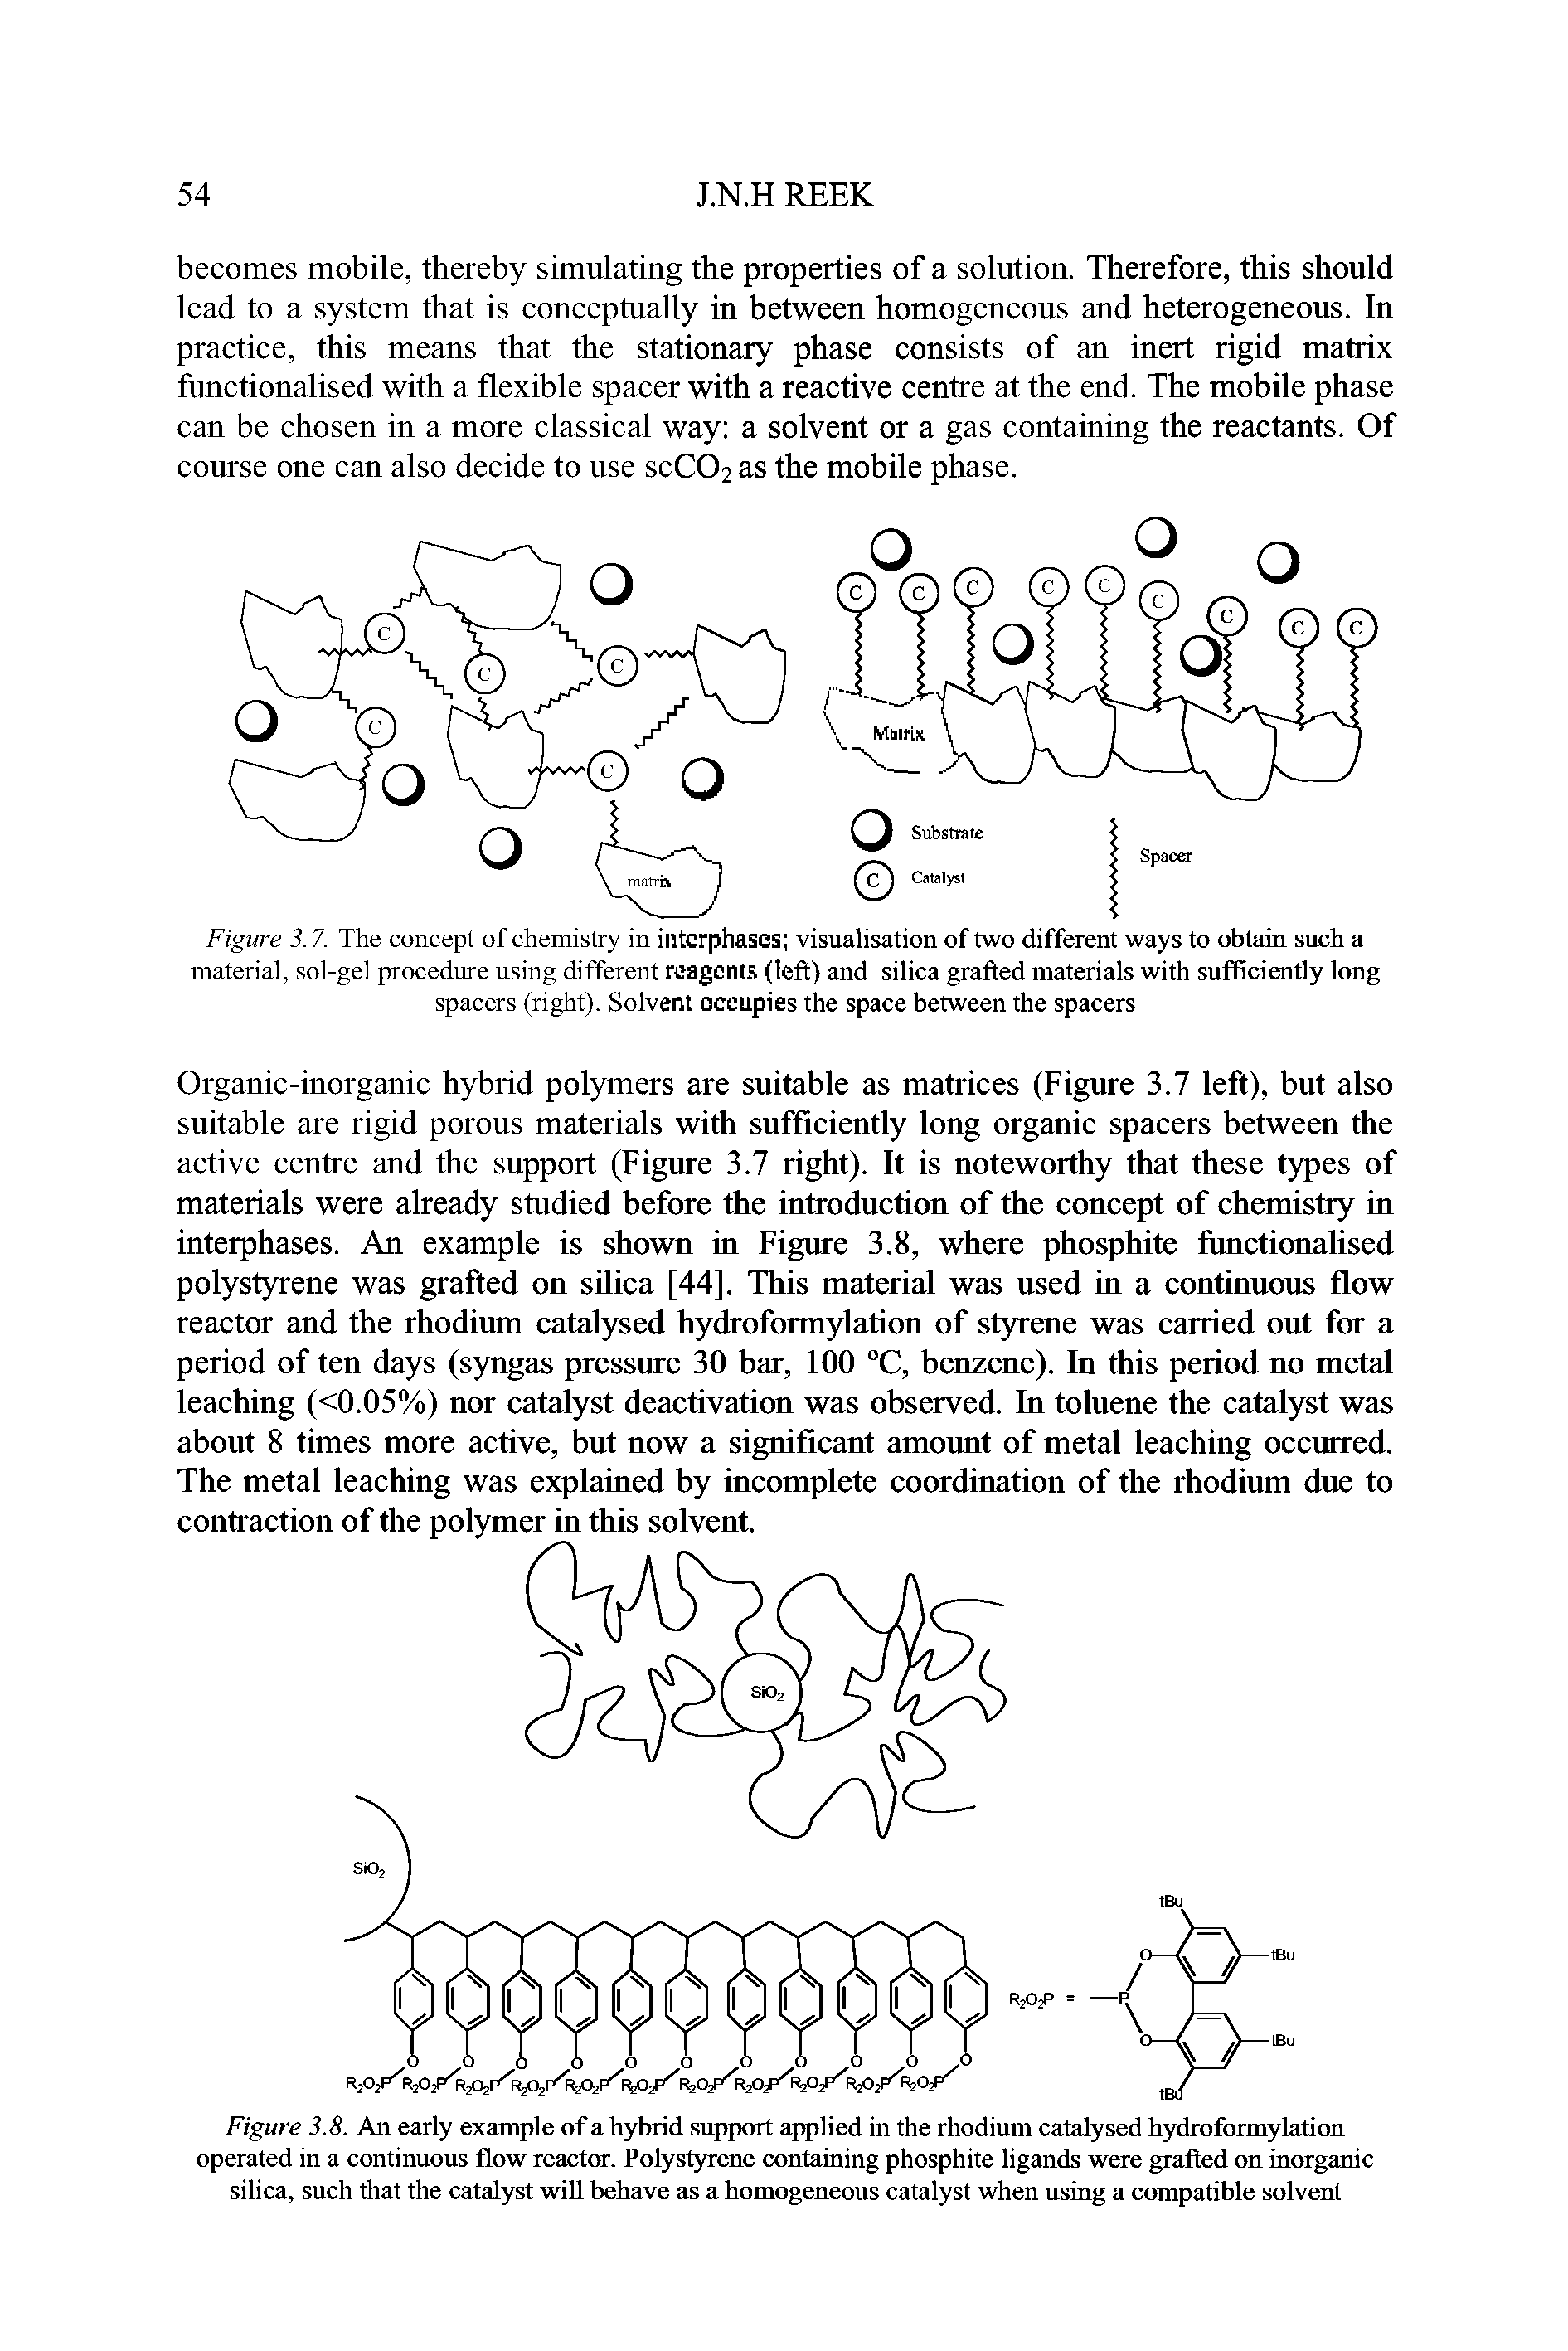 Figure 3.8. An early example of a hybrid support applied in the rhodium catalysed hydroformylation operated in a continuous flow reactor. Polystyrene containing phosphite ligands were grafted on inorganic silica, such that the catalyst will behave as a homogeneous catalyst when using a compatible solvent...